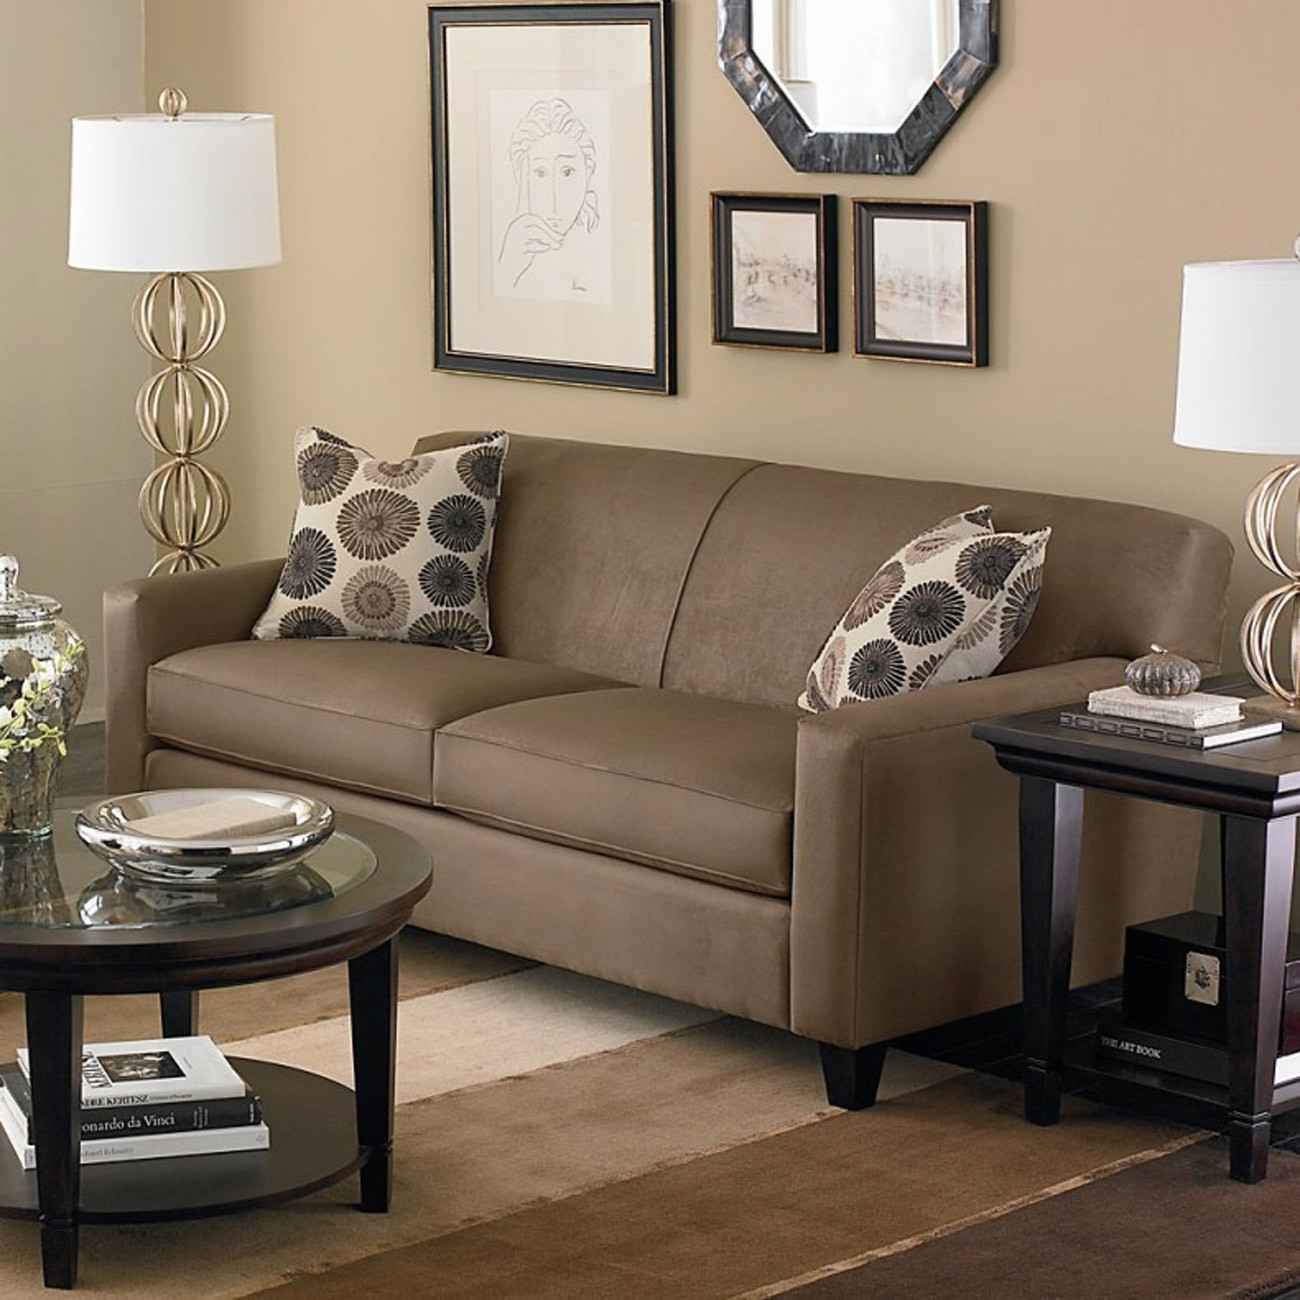 Small Living Room Furniture
 Find Suitable Living Room Furniture With Your Style